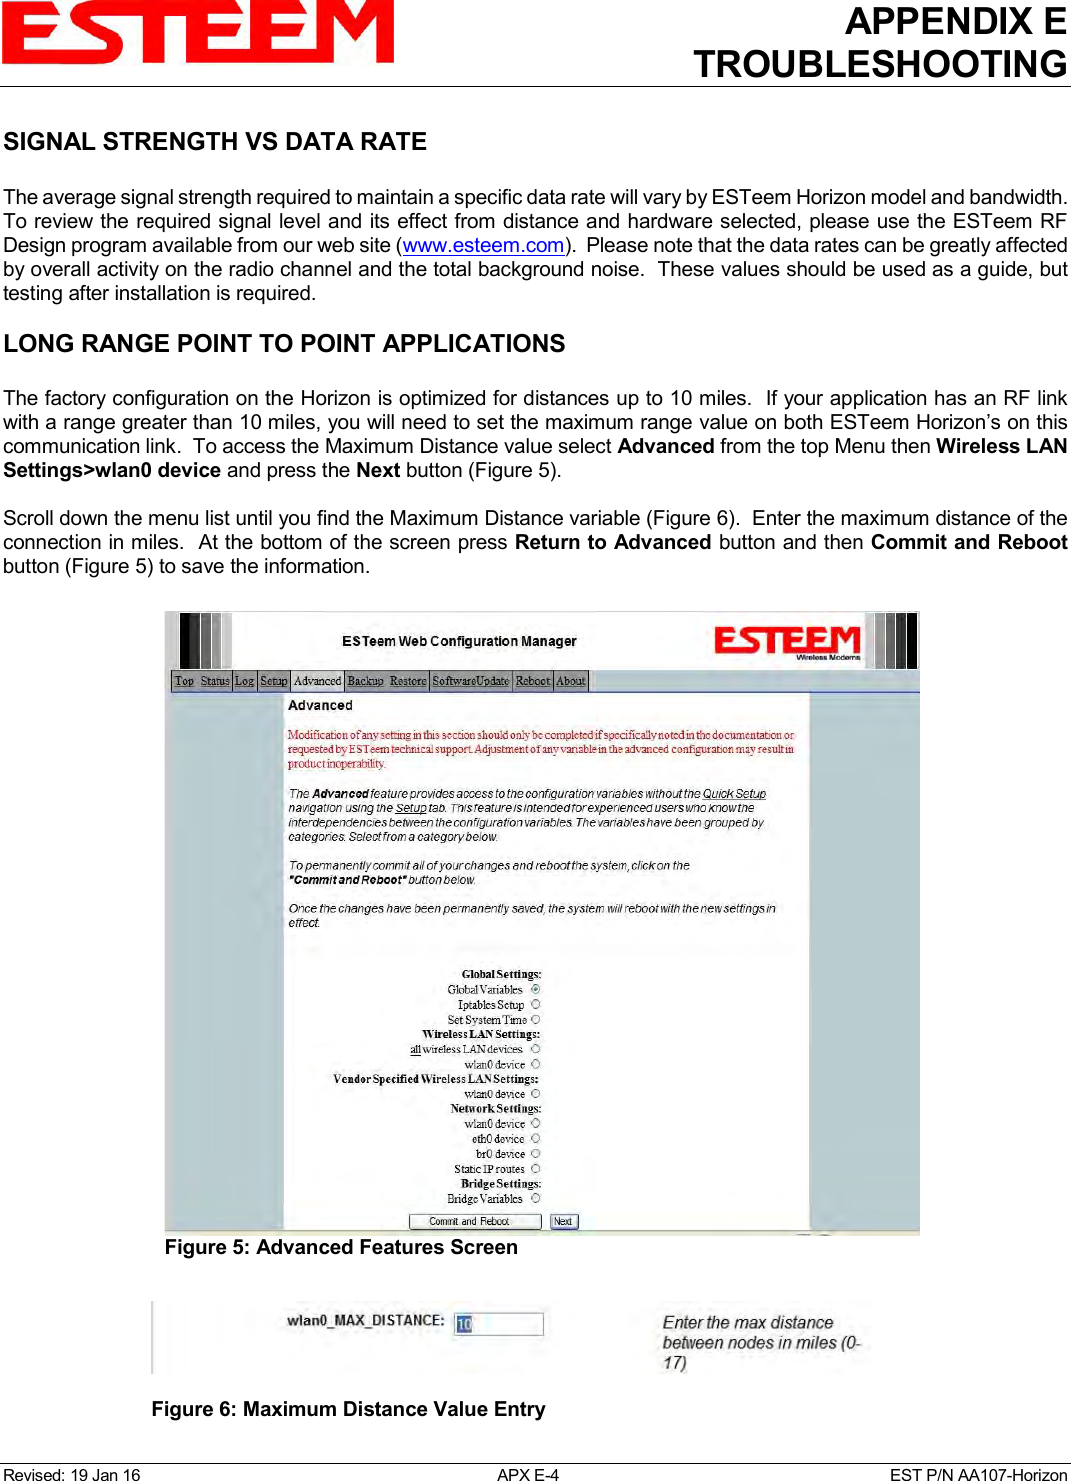 APPENDIX E TROUBLESHOOTING   Revised: 19 Jan 16  APX E-4  EST P/N AA107-Horizon SIGNAL STRENGTH VS DATA RATE   The average signal strength required to maintain a specific data rate will vary by ESTeem Horizon model and bandwidth.  To review the required signal level and its effect from distance and hardware selected, please use the ESTeem RF Design program available from our web site (www.esteem.com).  Please note that the data rates can be greatly affected by overall activity on the radio channel and the total background noise.  These values should be used as a guide, but testing after installation is required.  LONG RANGE POINT TO POINT APPLICATIONS  The factory configuration on the Horizon is optimized for distances up to 10 miles.  If your application has an RF link with a range greater than 10 miles, you will need to set the maximum range value on both ESTeem Horizon’s on this communication link.  To access the Maximum Distance value select Advanced from the top Menu then Wireless LAN Settings&gt;wlan0 device and press the Next button (Figure 5).  Scroll down the menu list until you find the Maximum Distance variable (Figure 6).  Enter the maximum distance of the connection in miles.  At the bottom of the screen press Return to Advanced button and then Commit and Reboot button (Figure 5) to save the information.   Figure 5: Advanced Features Screen   Figure 6: Maximum Distance Value Entry  